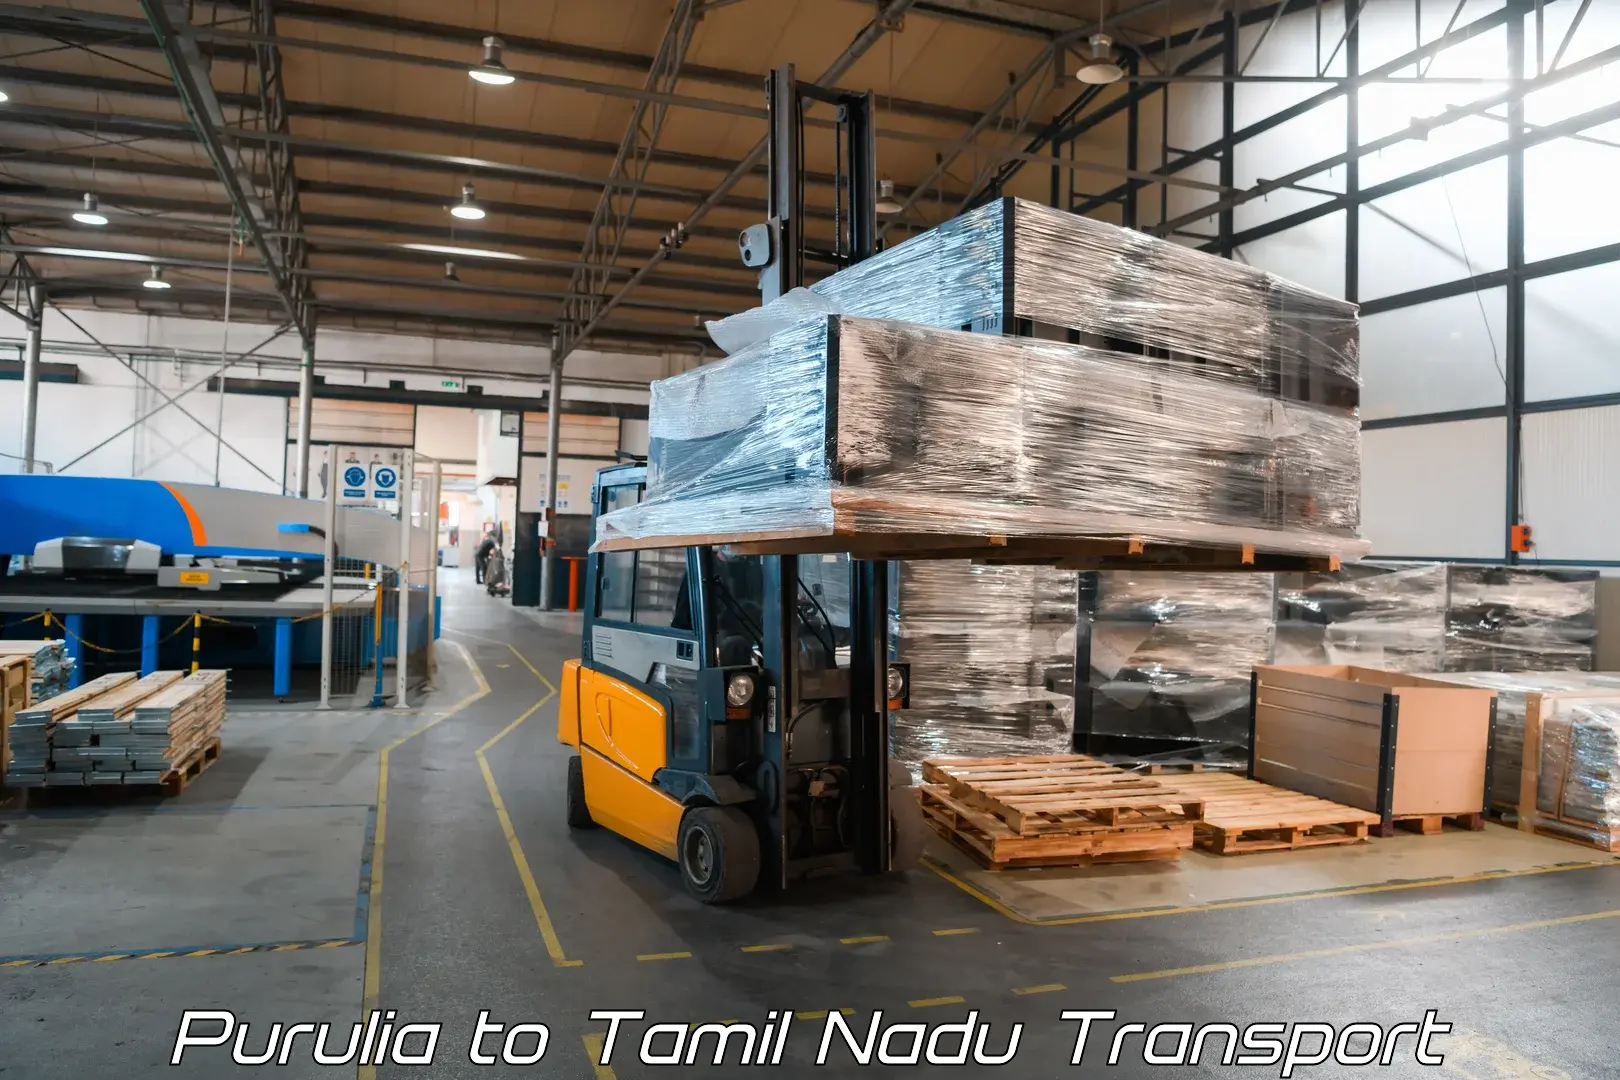 Truck transport companies in India Purulia to Chetpet